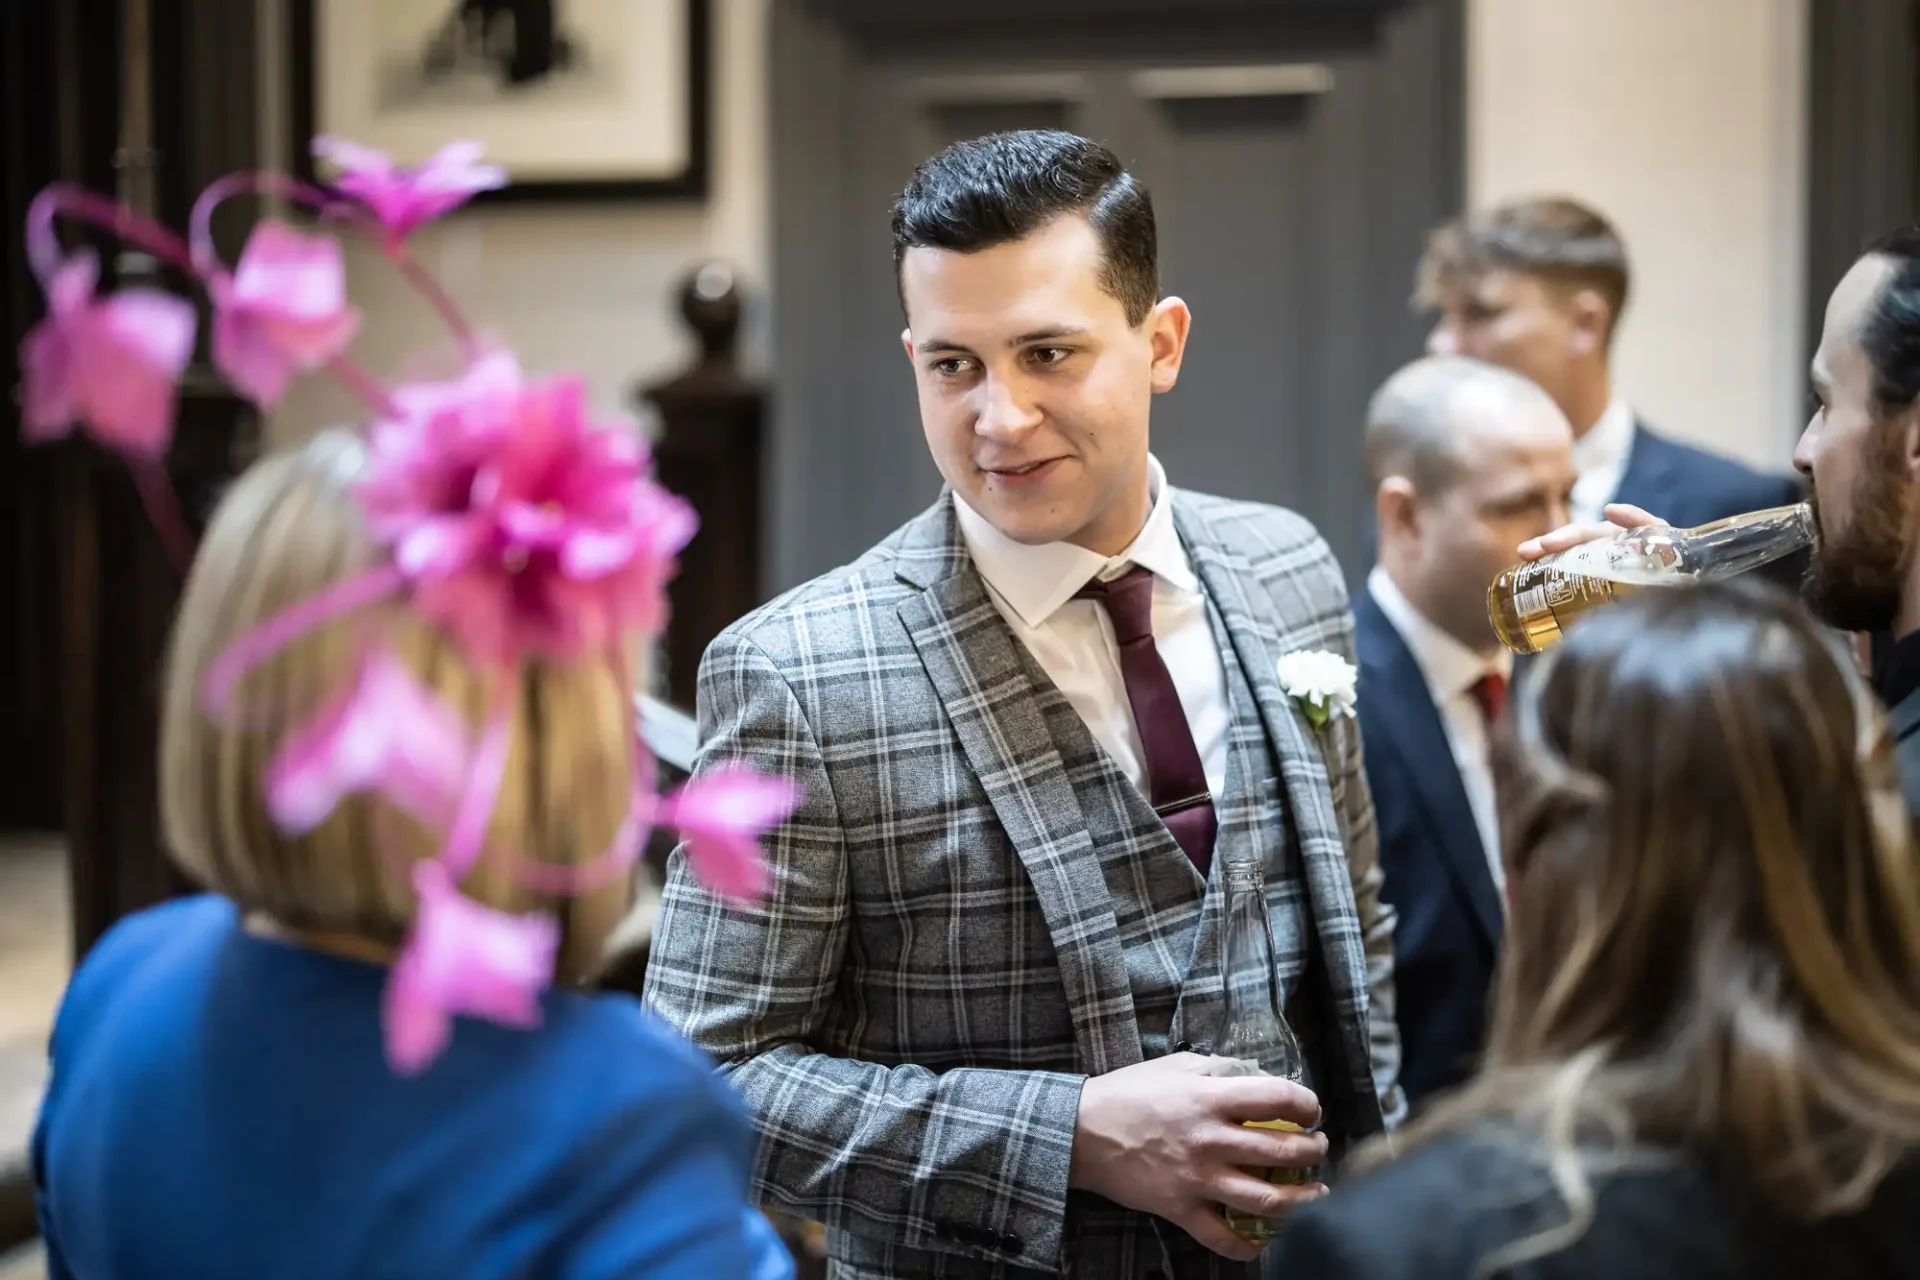 A man in a checkered suit with a boutonniere, holding a glass of wine, listening to a woman at a social gathering.